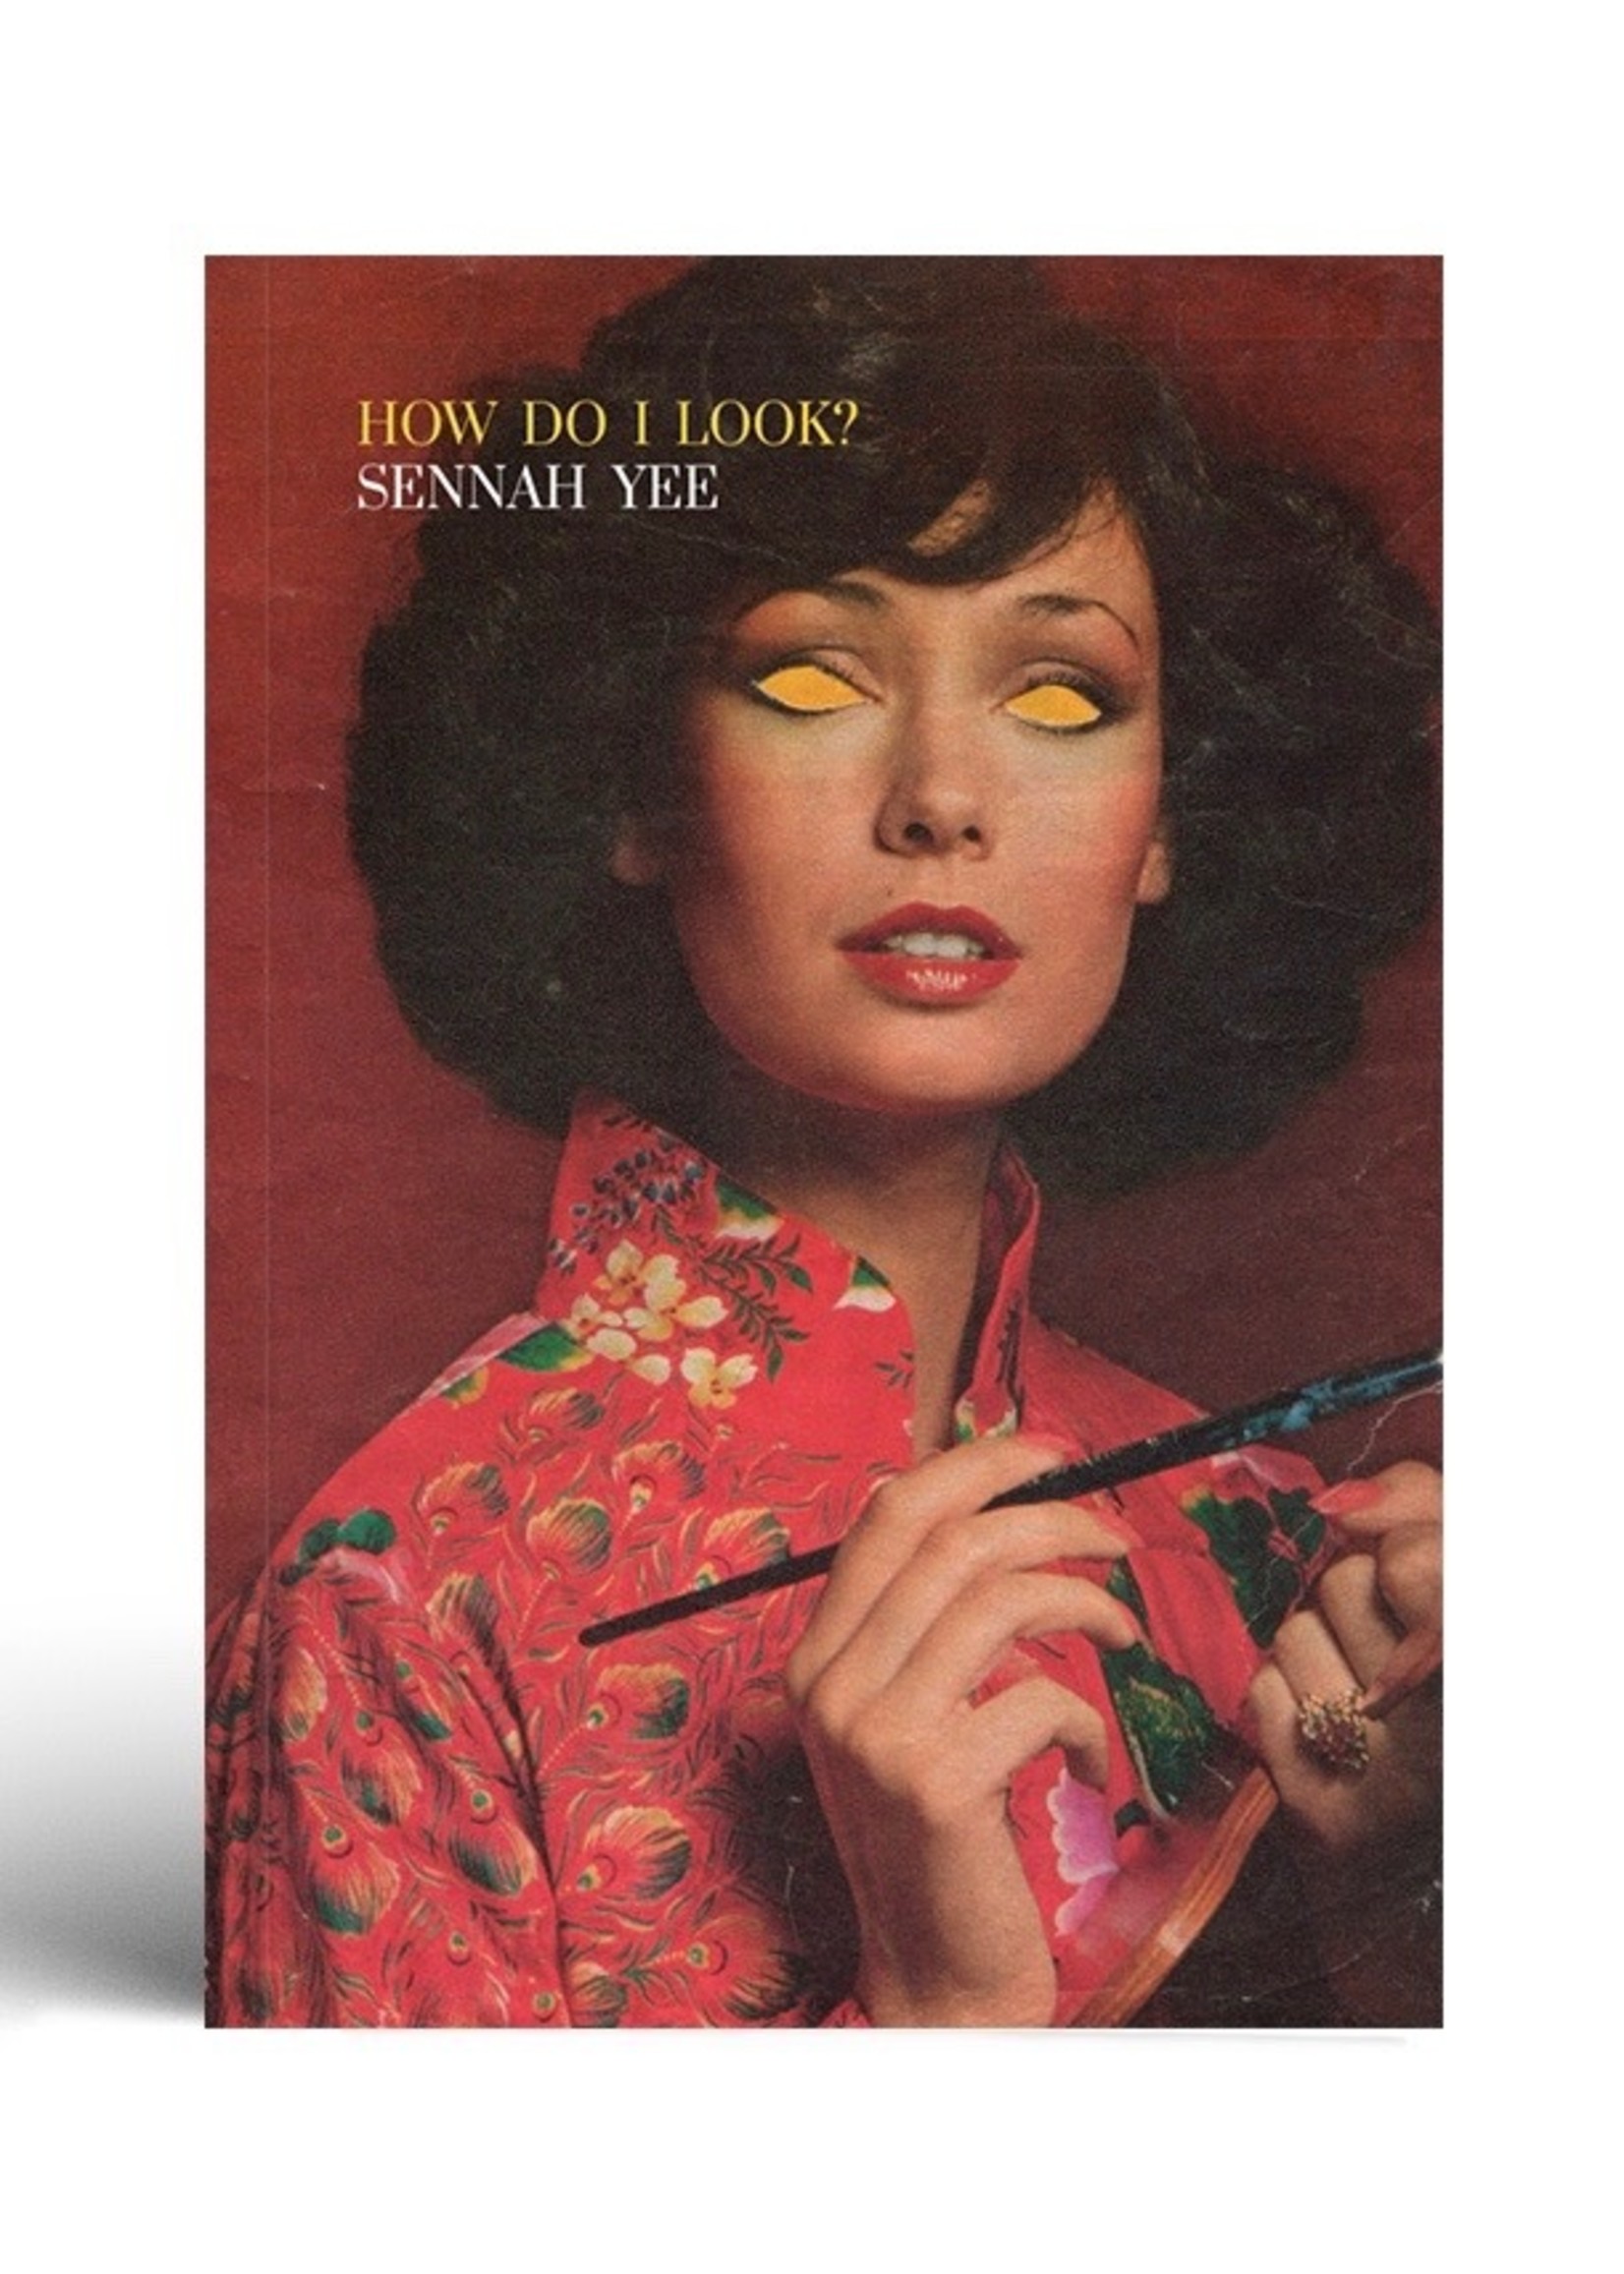 Metatron Press "How Do I Look?" by Sennah Yee, published by Metatron Press